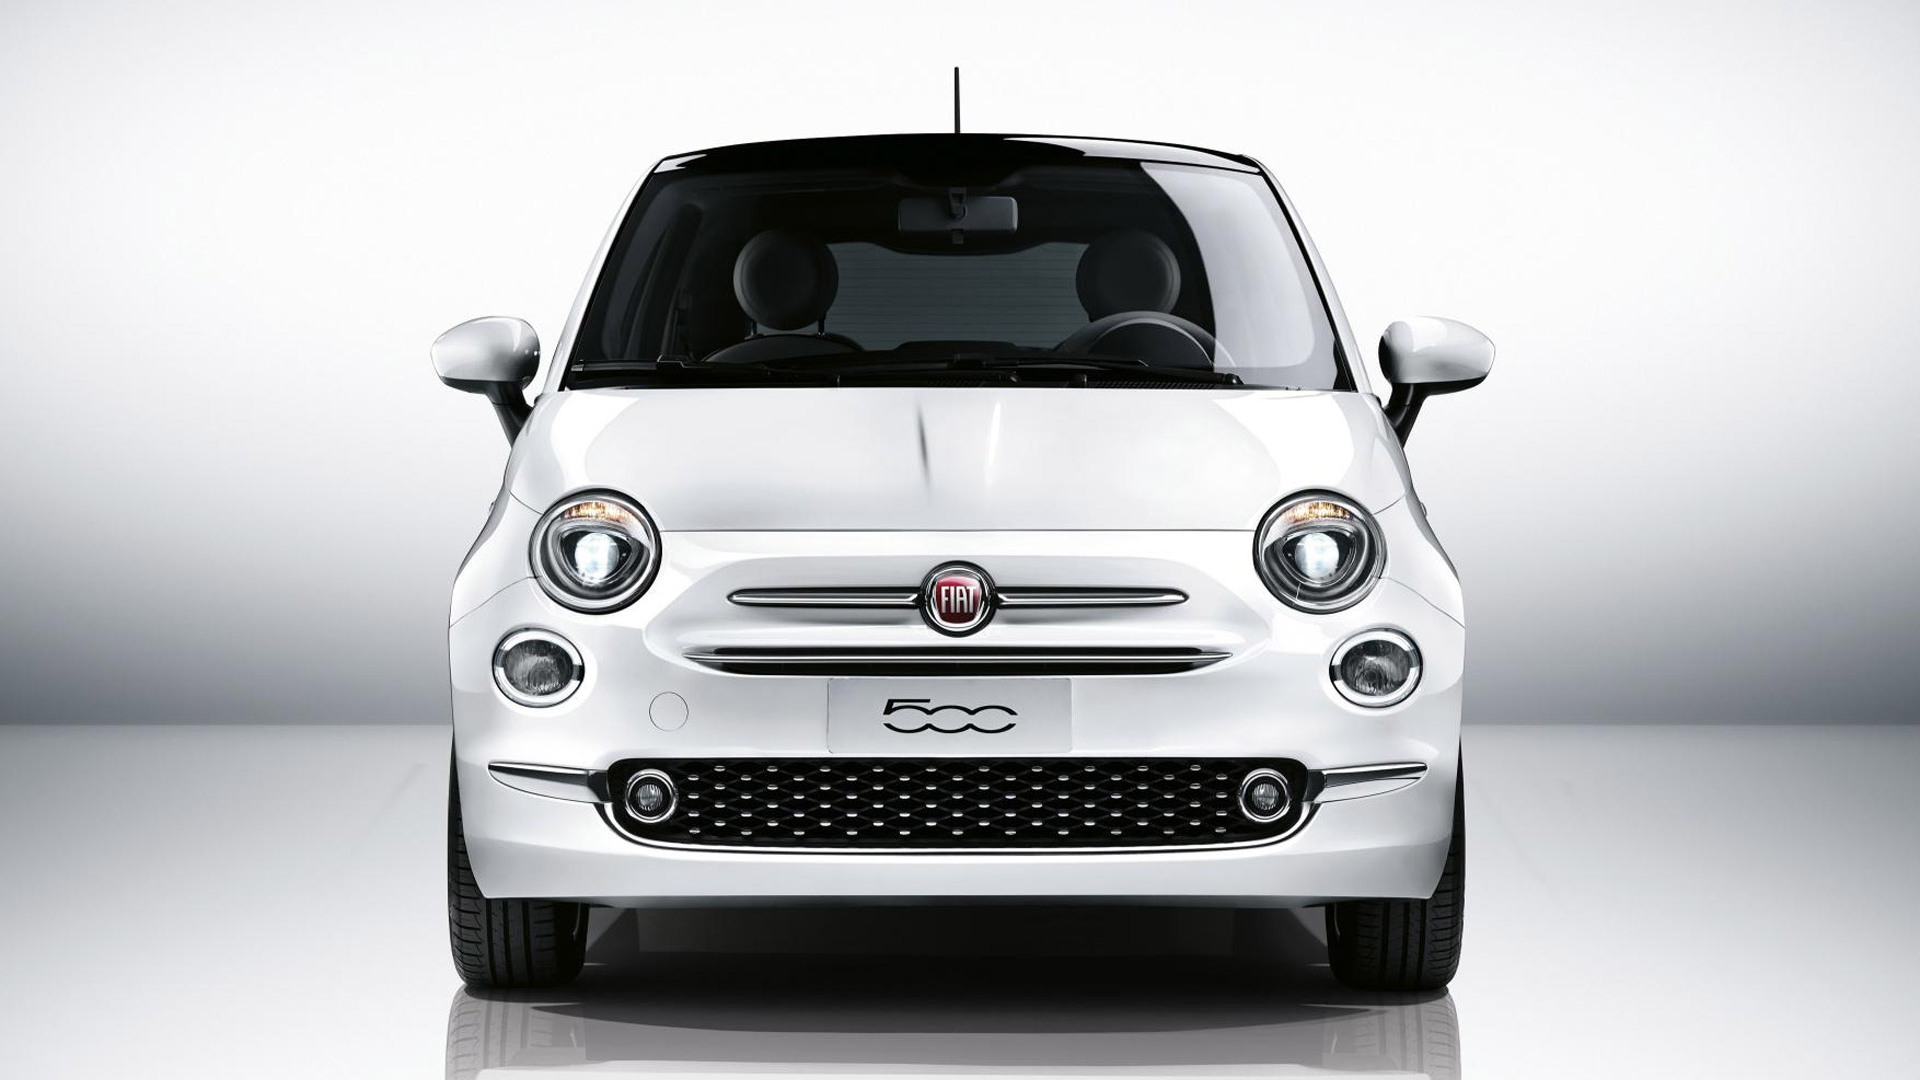 2016 Fiat 500 Updates Include Uconnect Touchscreen ...